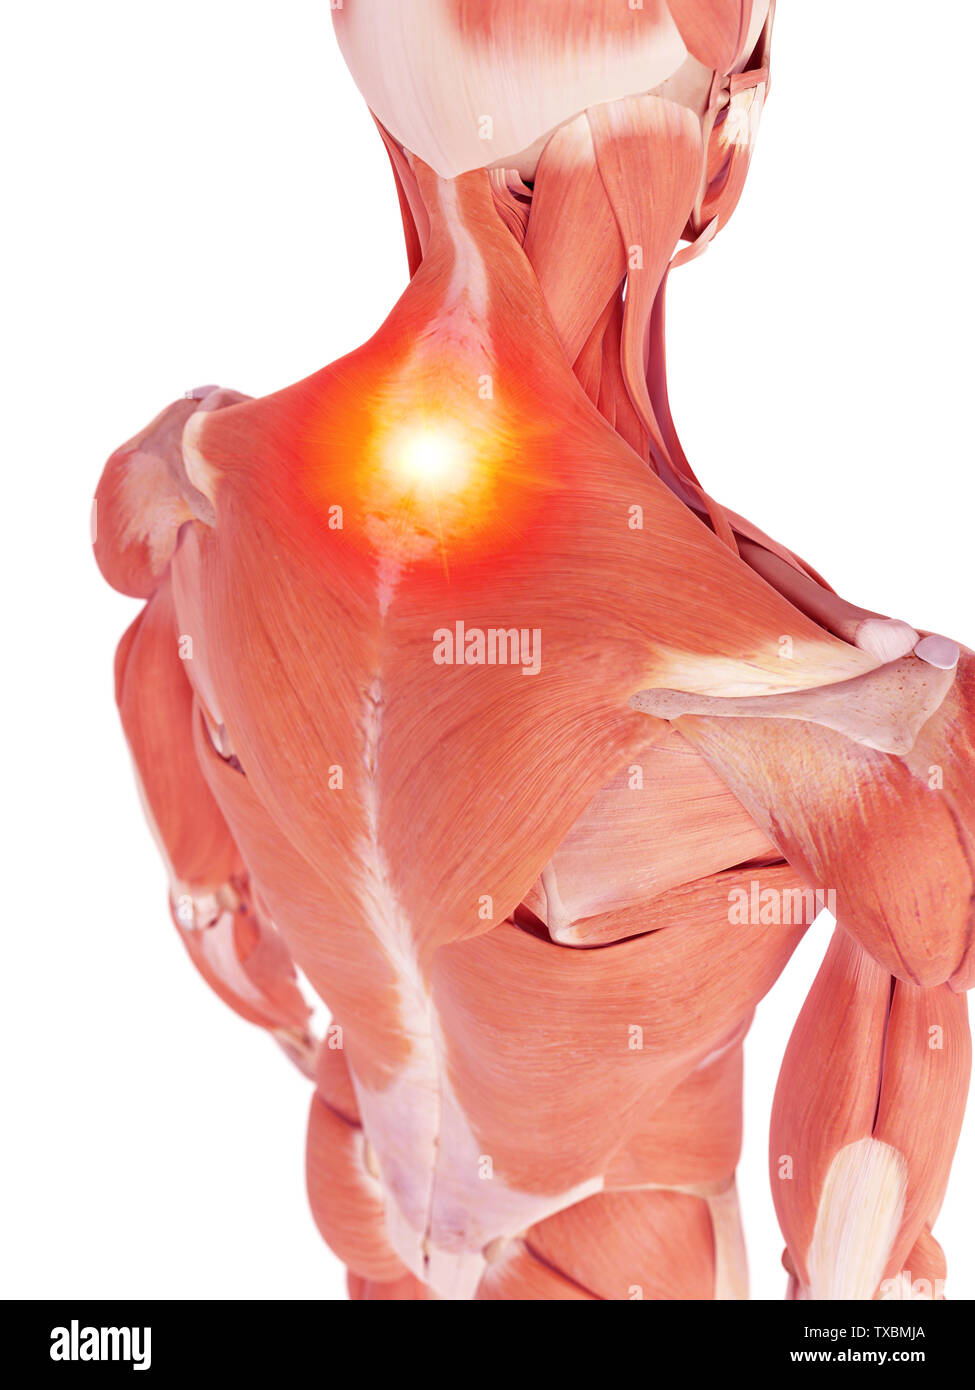 medical accurate illustration of the back muscles showing pain Stock Photo